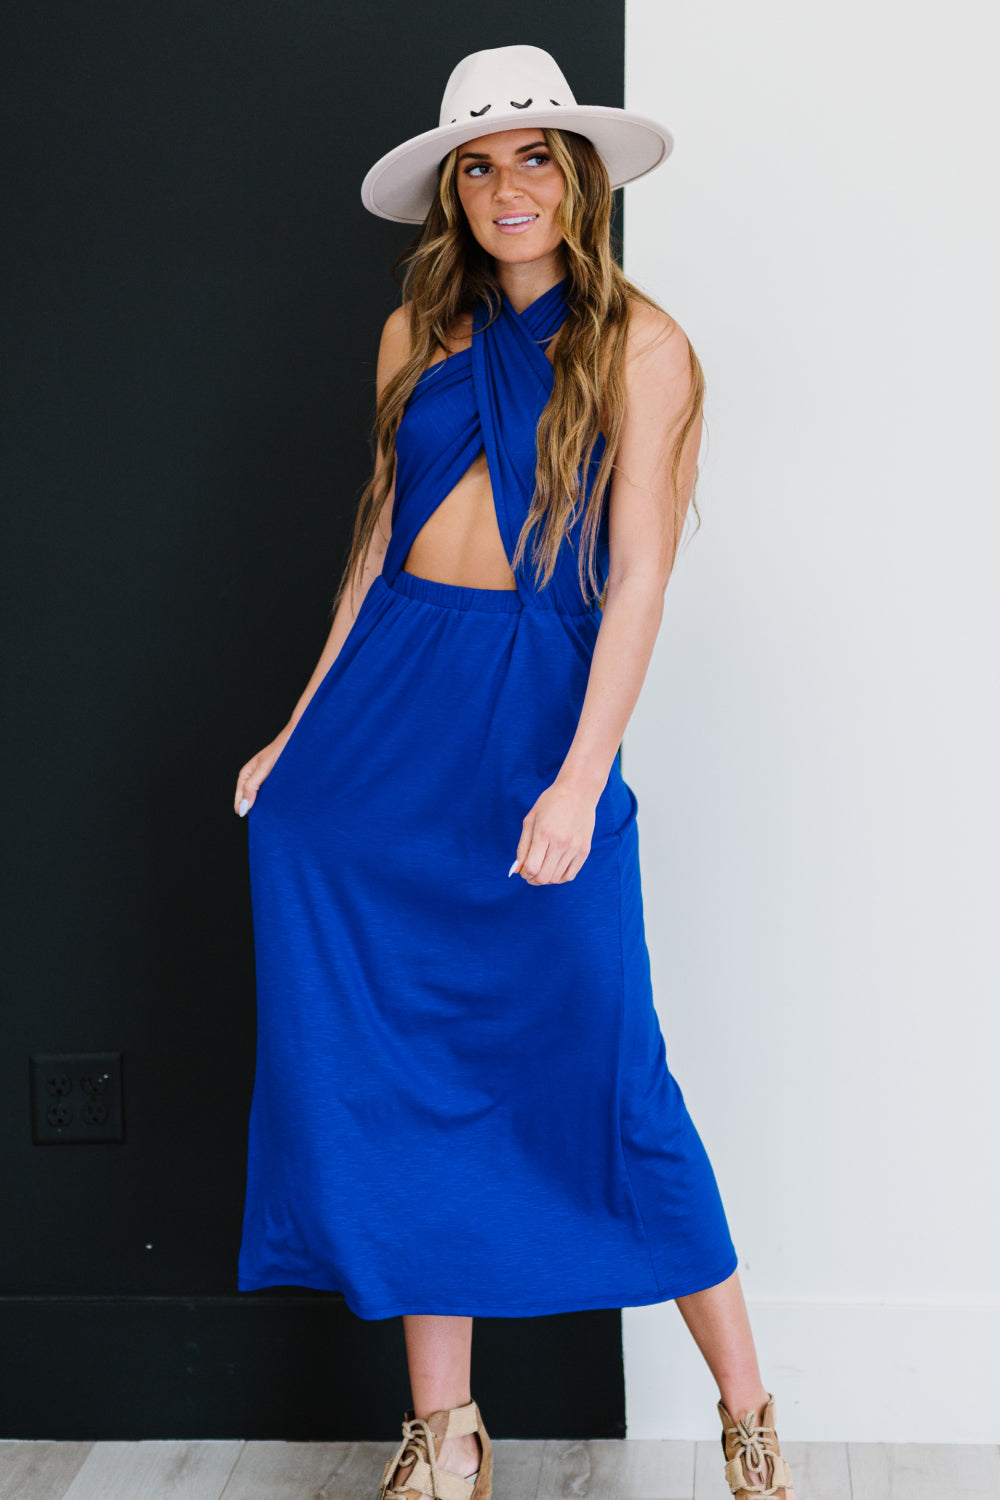 Limitless Options Multiway Convertible Dress in Toffee & Royal Blue